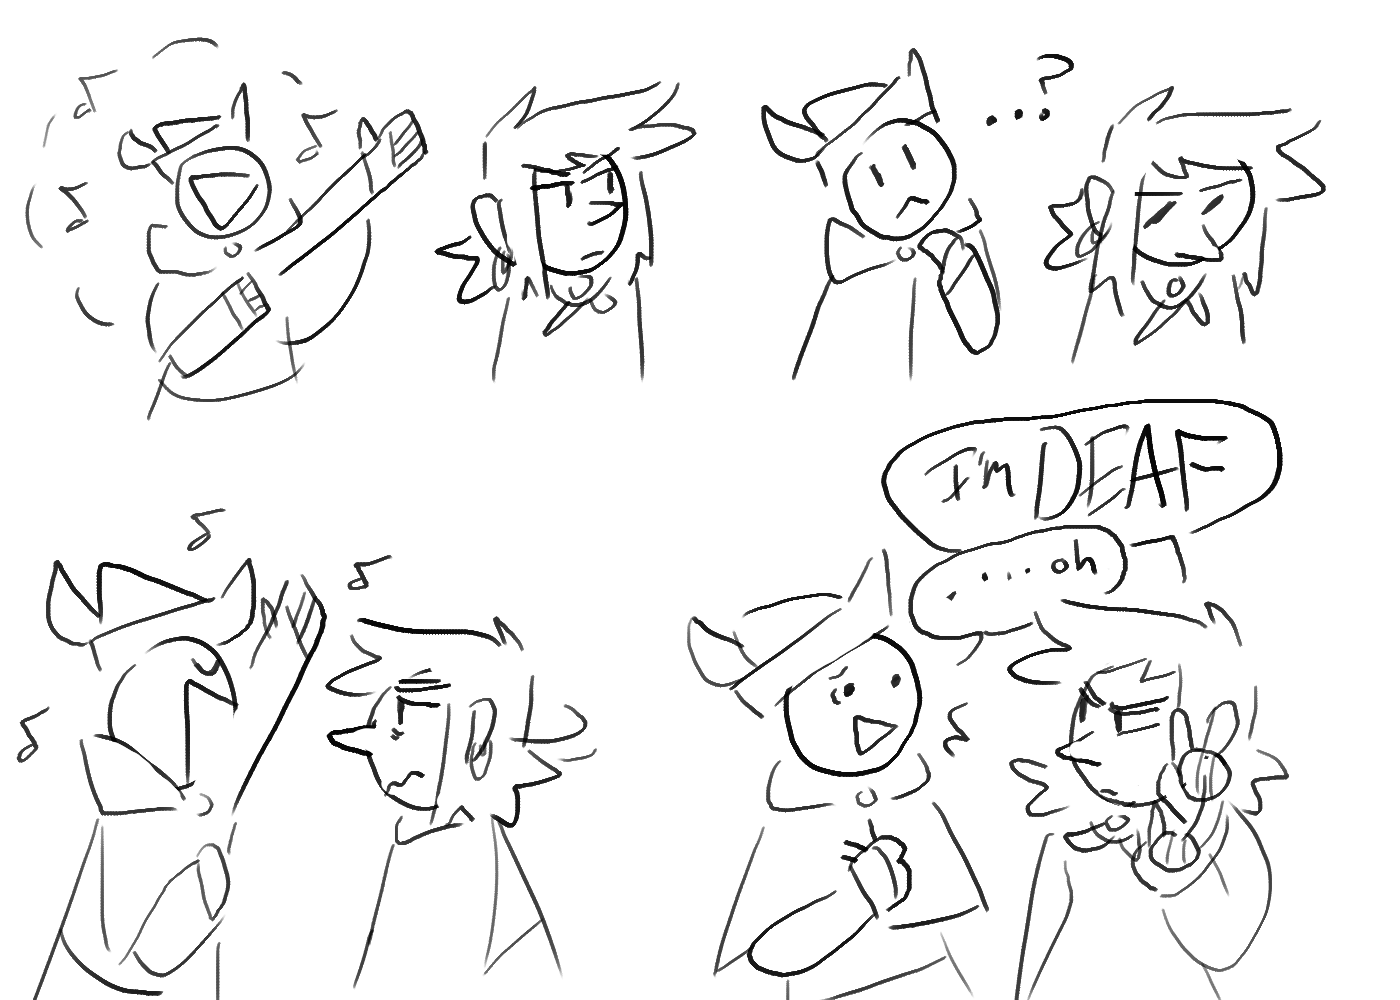 A comic of Kiwi singing near Miriam, confused about why she isn't paying attention, before she tells them she's deaf.